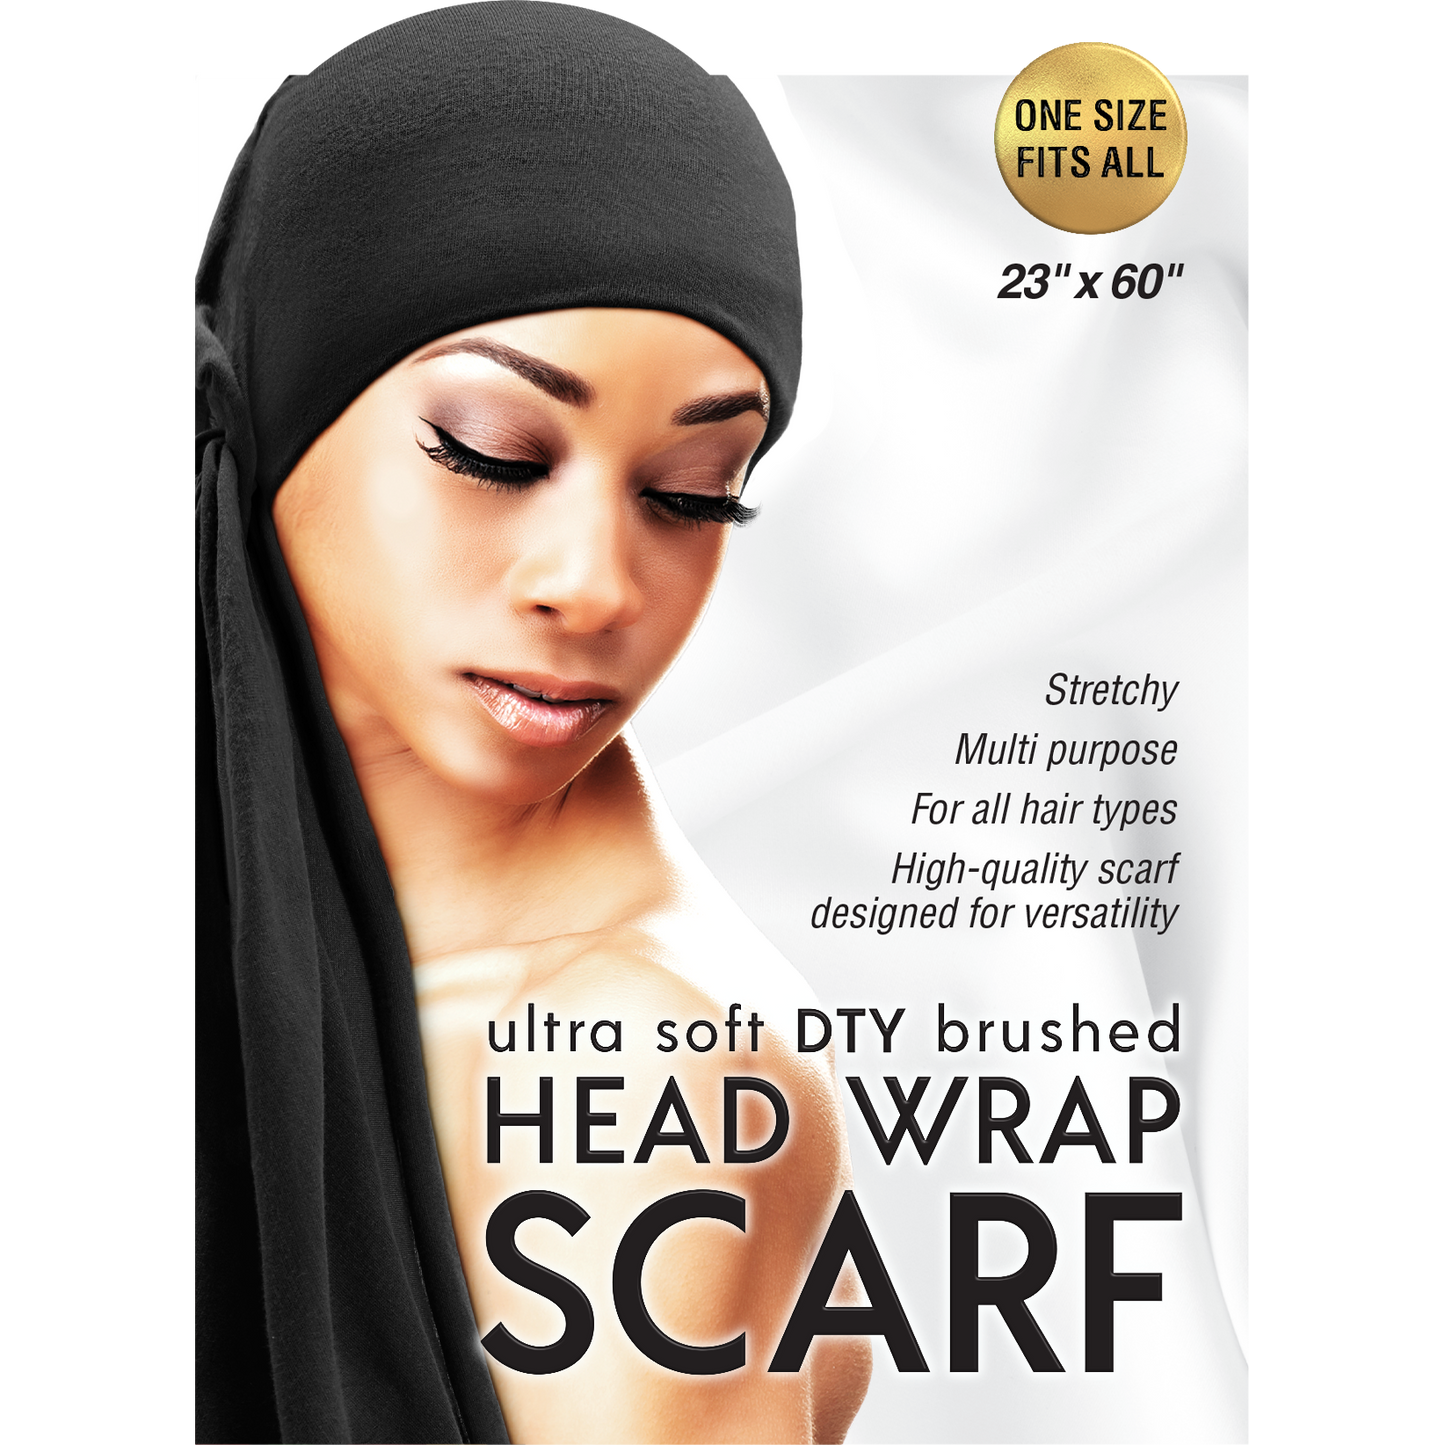 ULTRA SOFT DTY BRUSHED HEAD WRAP SCARF